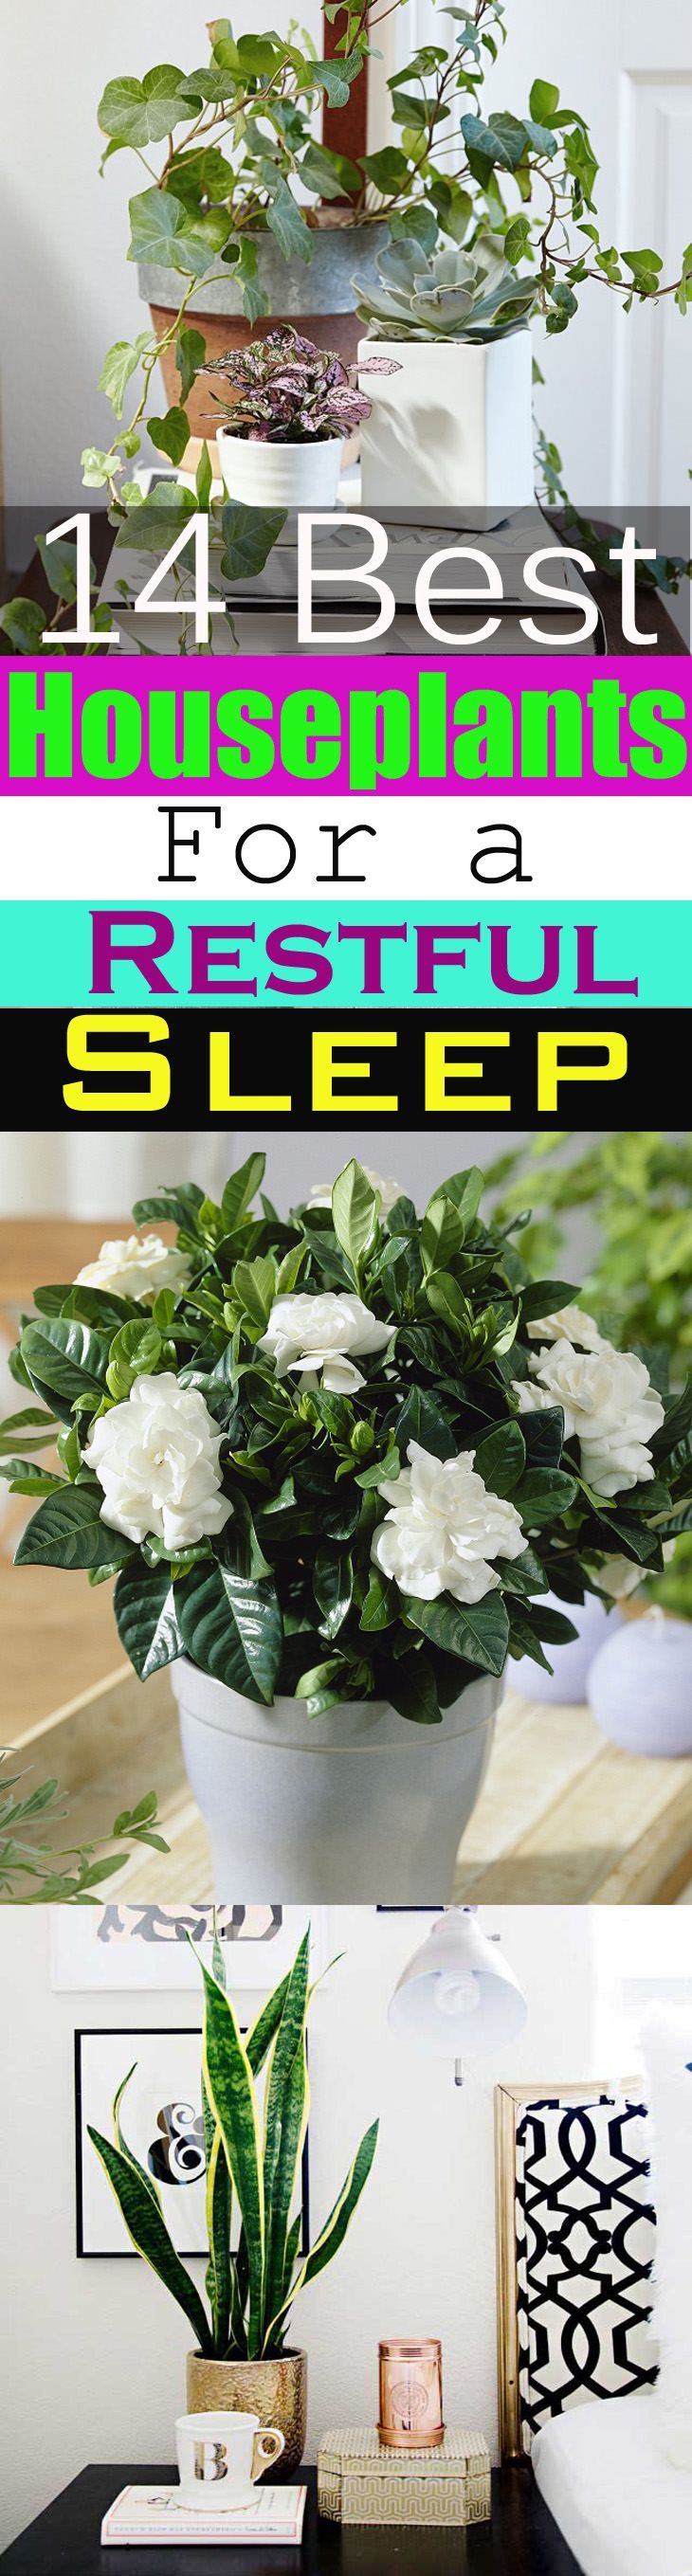 Plants grown indoors bring nature into the home but do you know there are plants that can help you sleep better? 14 Best